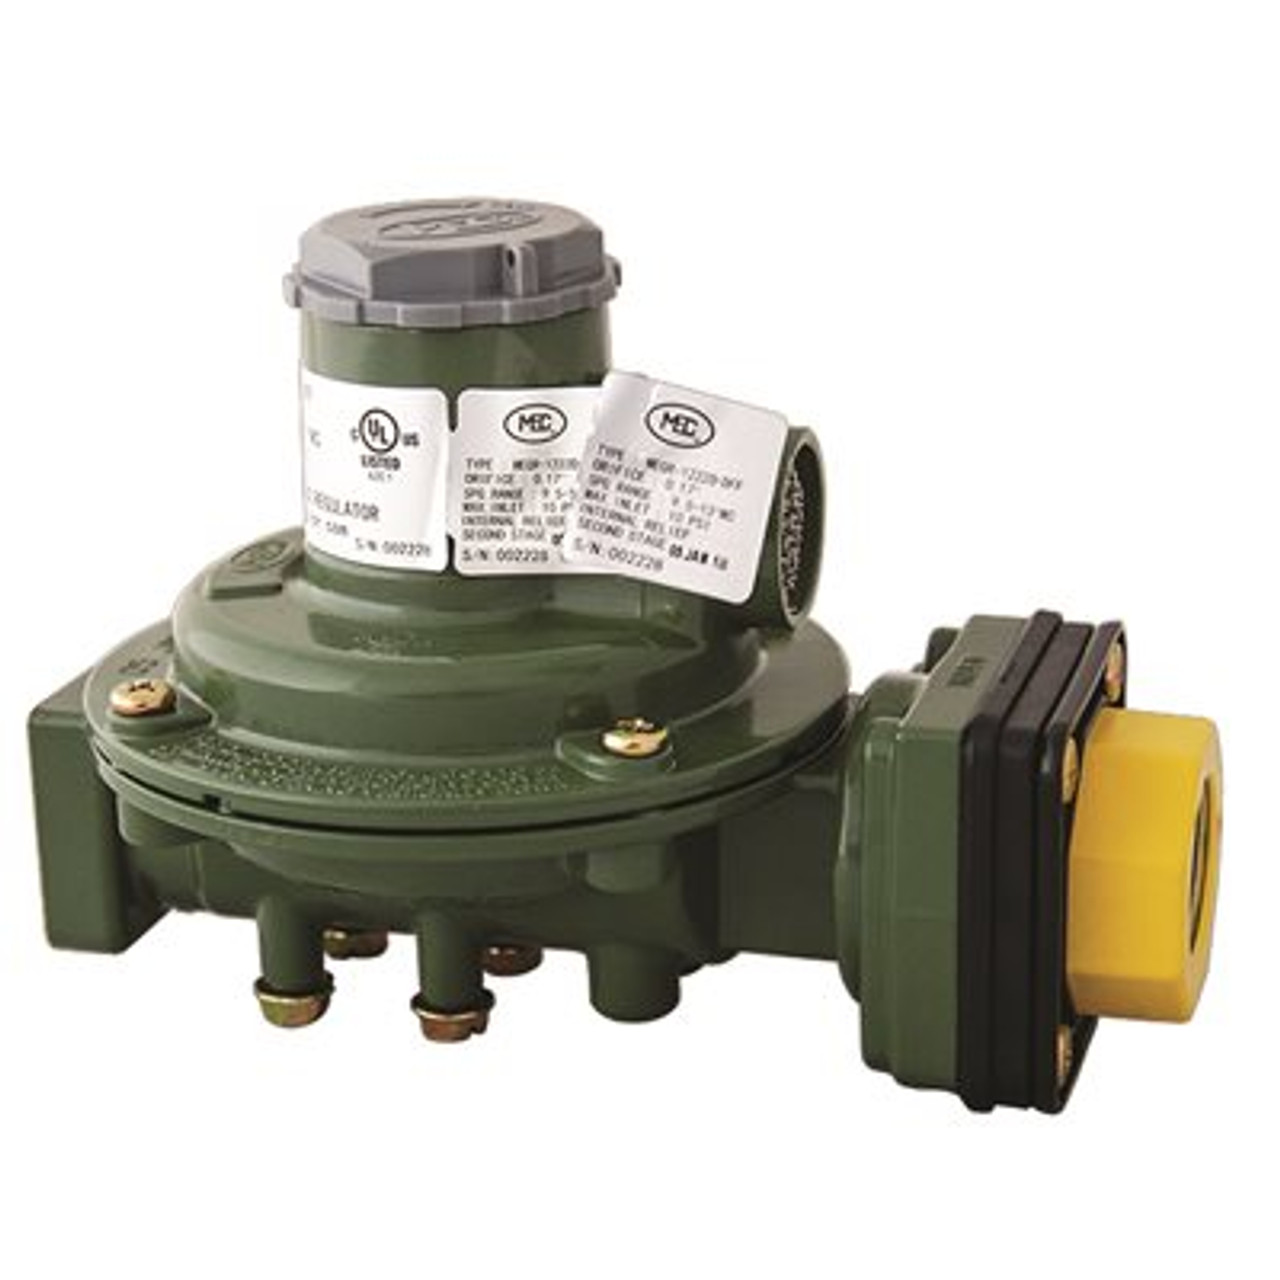 MARSHALL EXCELSIOR COMPANY MEC COMPACT DIELECTRIC REGULATOR, 1/2 IN. X 1/2 IN., 500,000 BTU